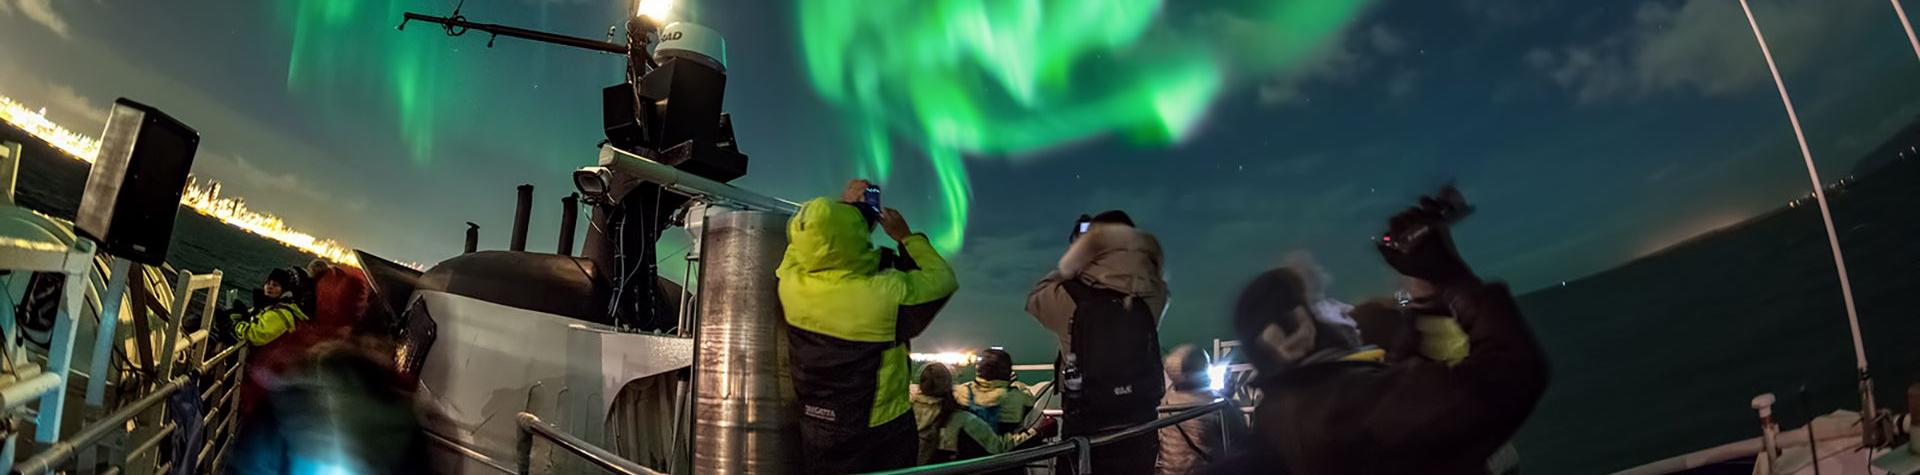 Northern Lights by Boat